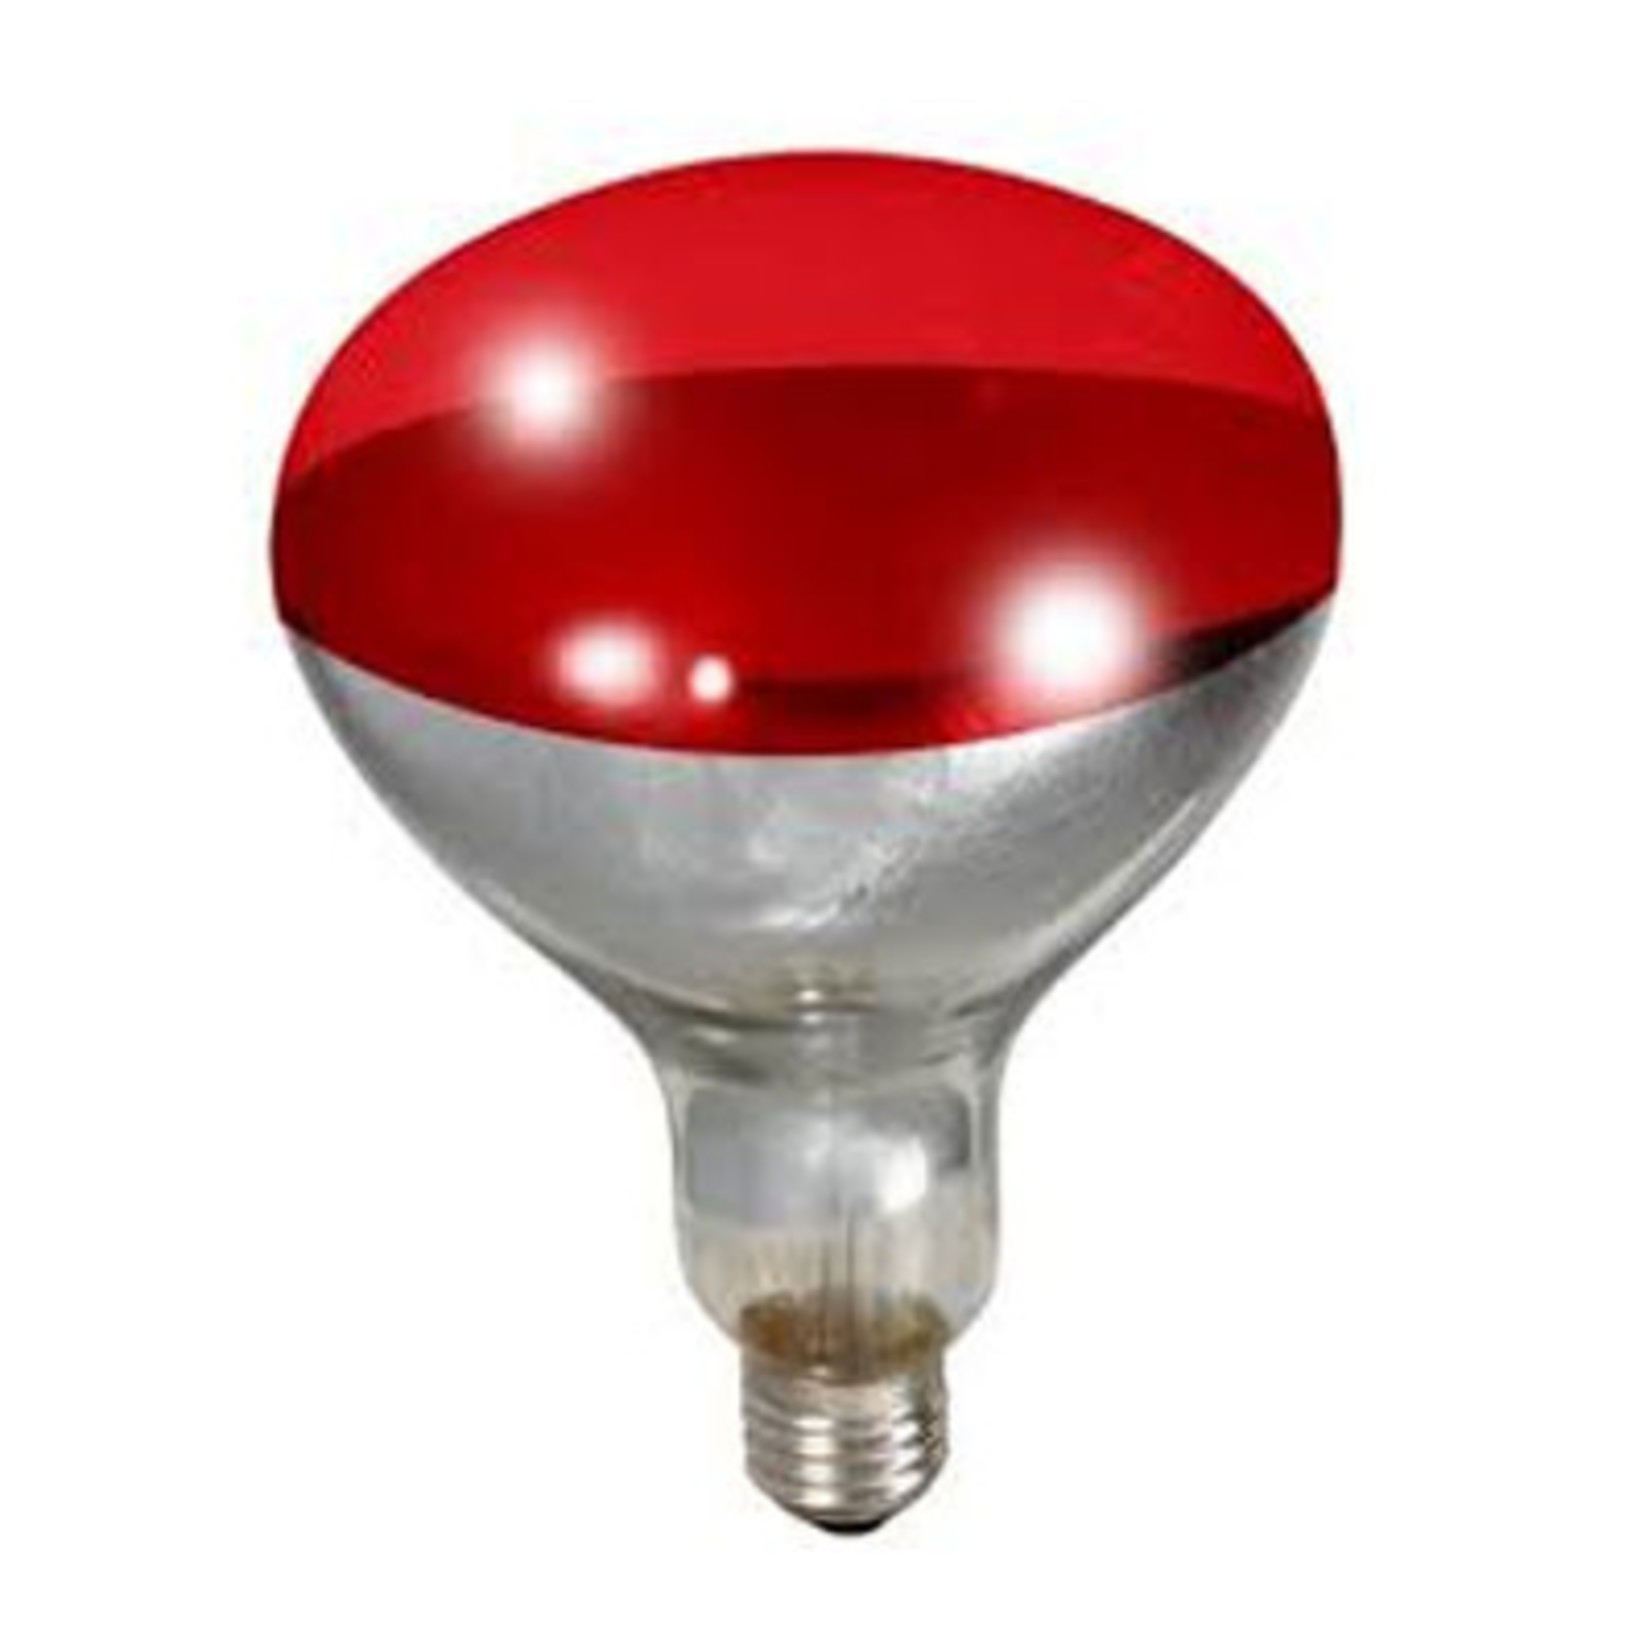 Feit Electric Red Heat Lamp Bulb 250W